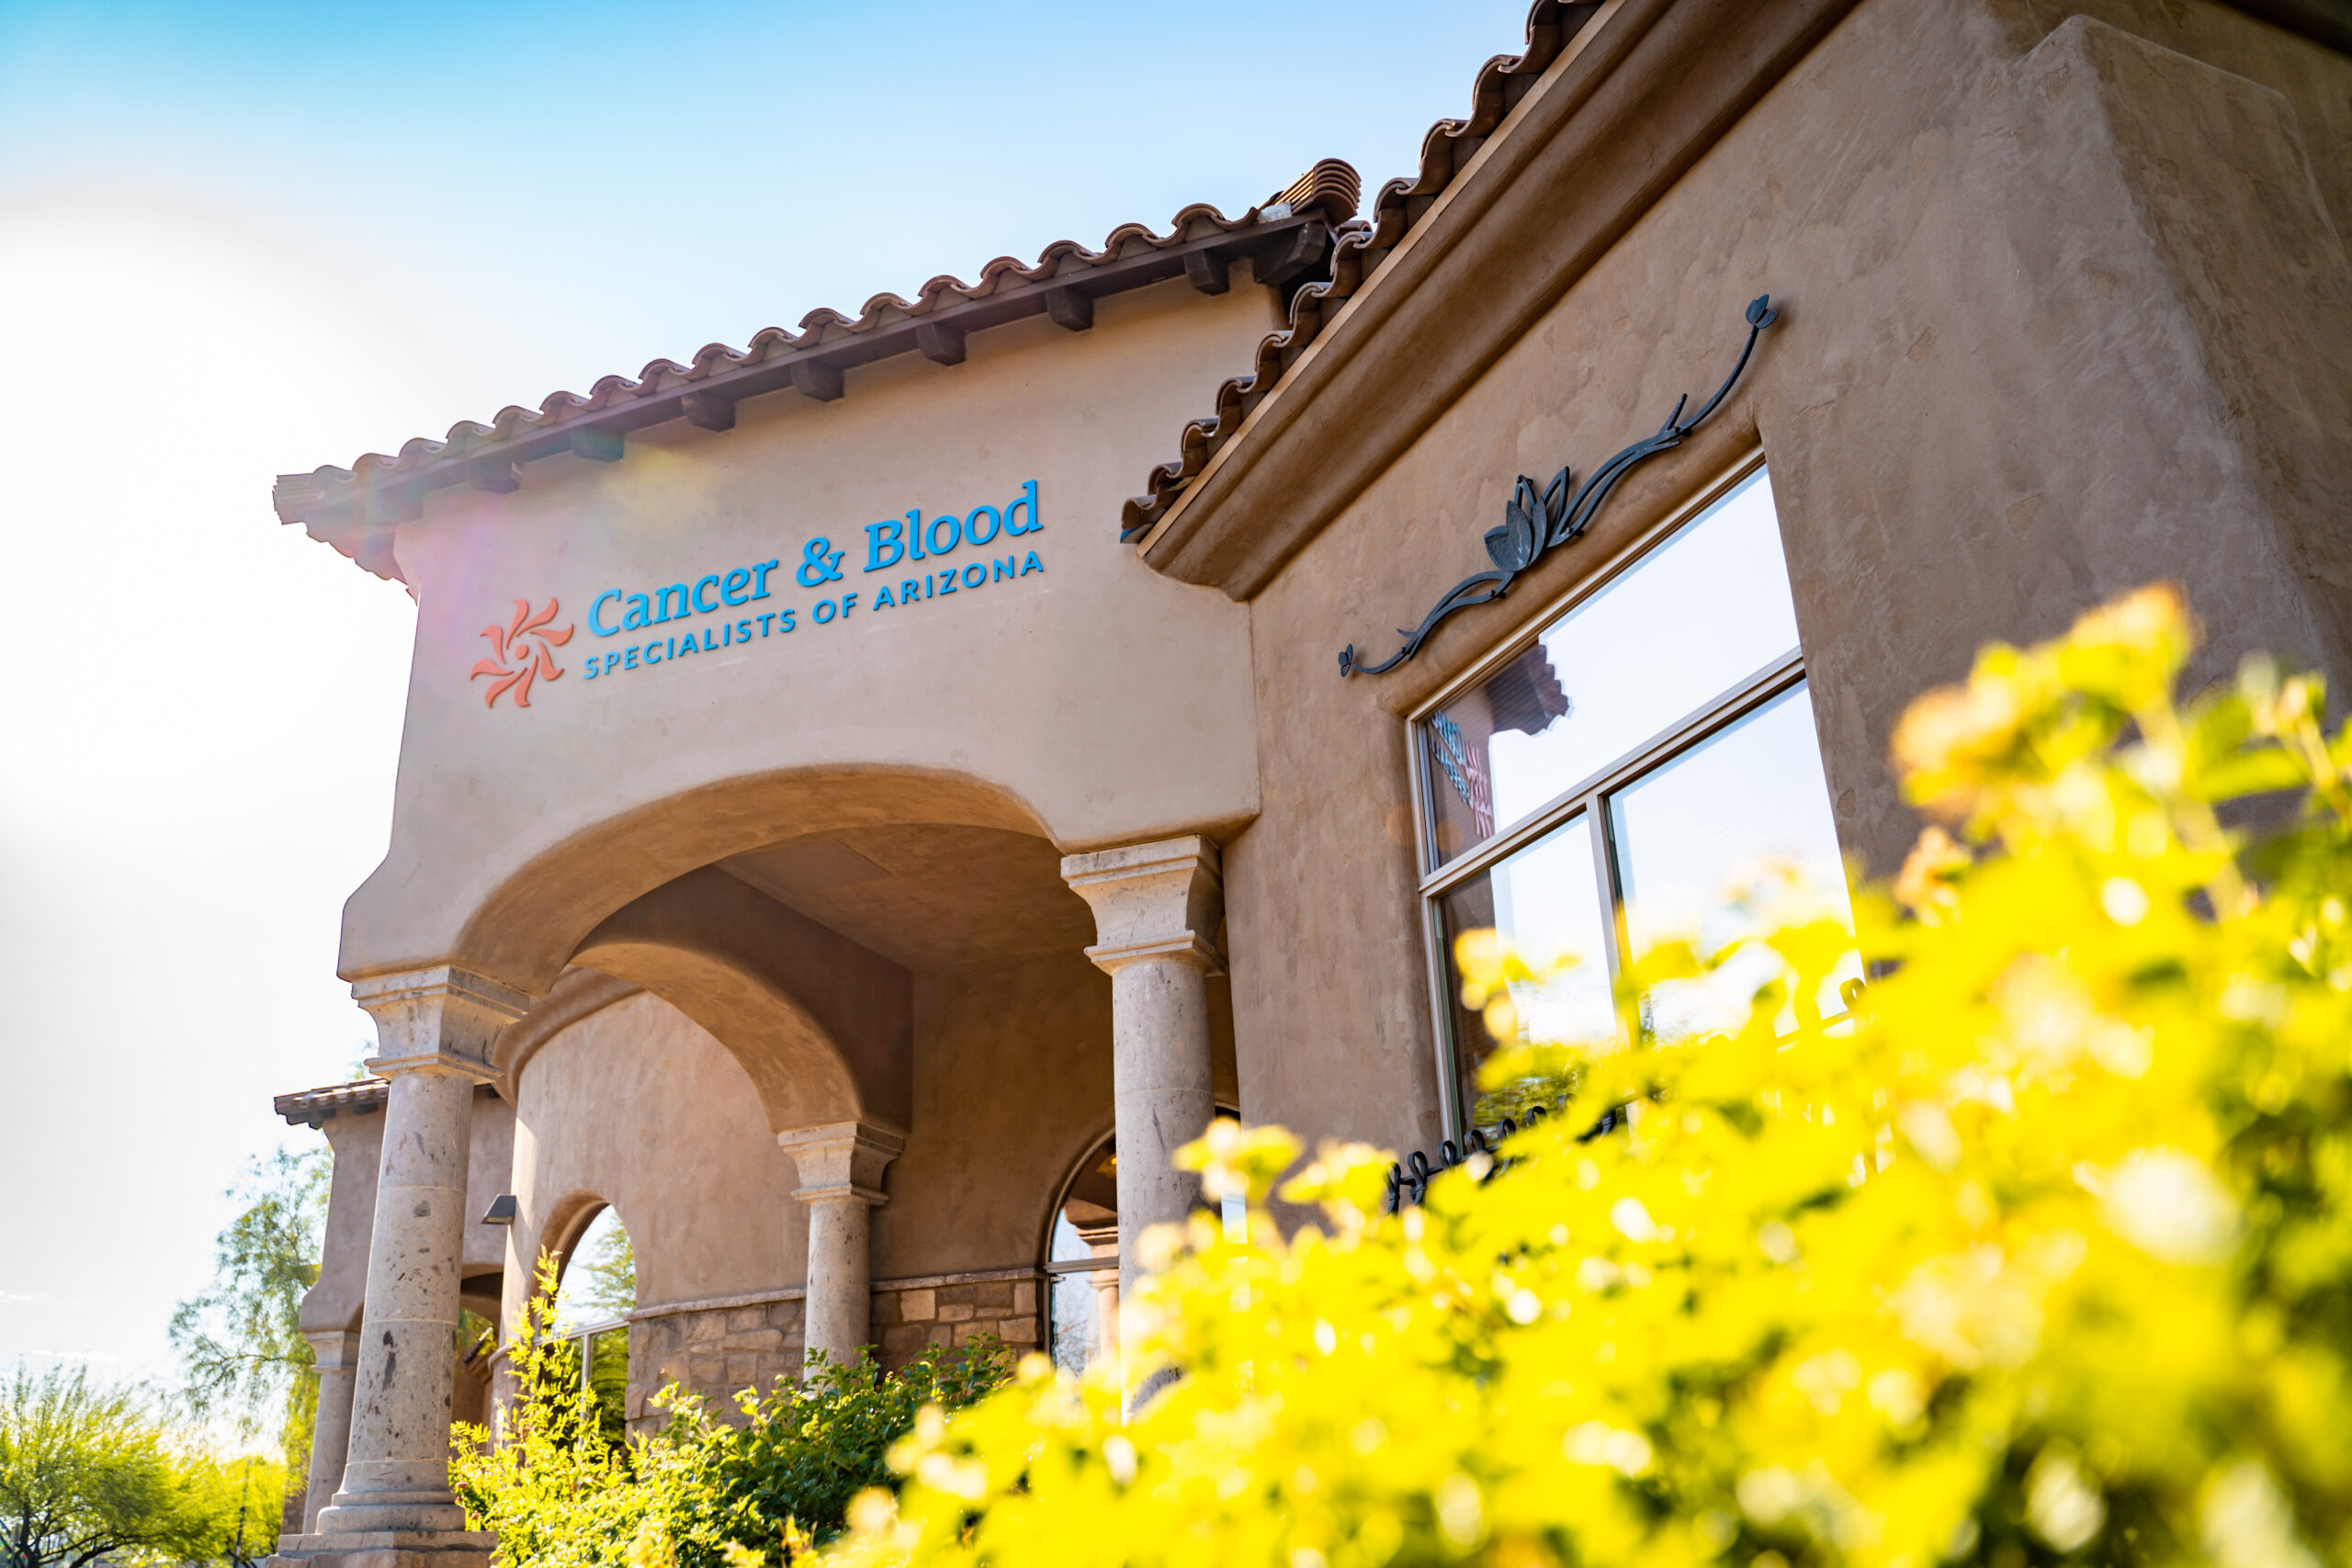 Cancer and blood specialists of arizona